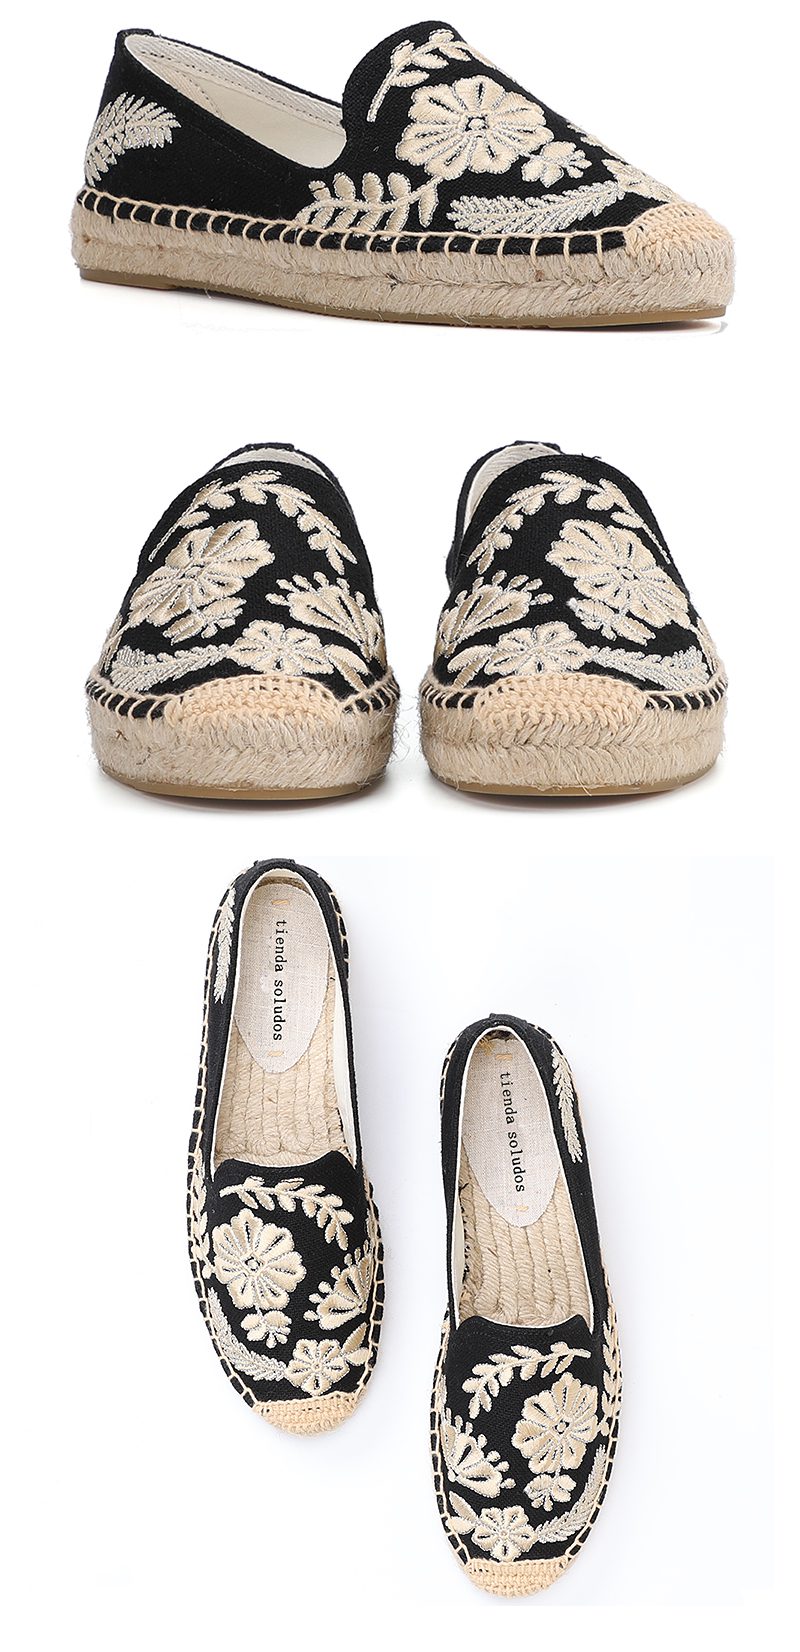 2021 Sapatos Womens Casual Espadrilles Slip-on Breathable Flax Hemp For Girl Shoes Fashion Embroidery Comfortable Ladies Girls